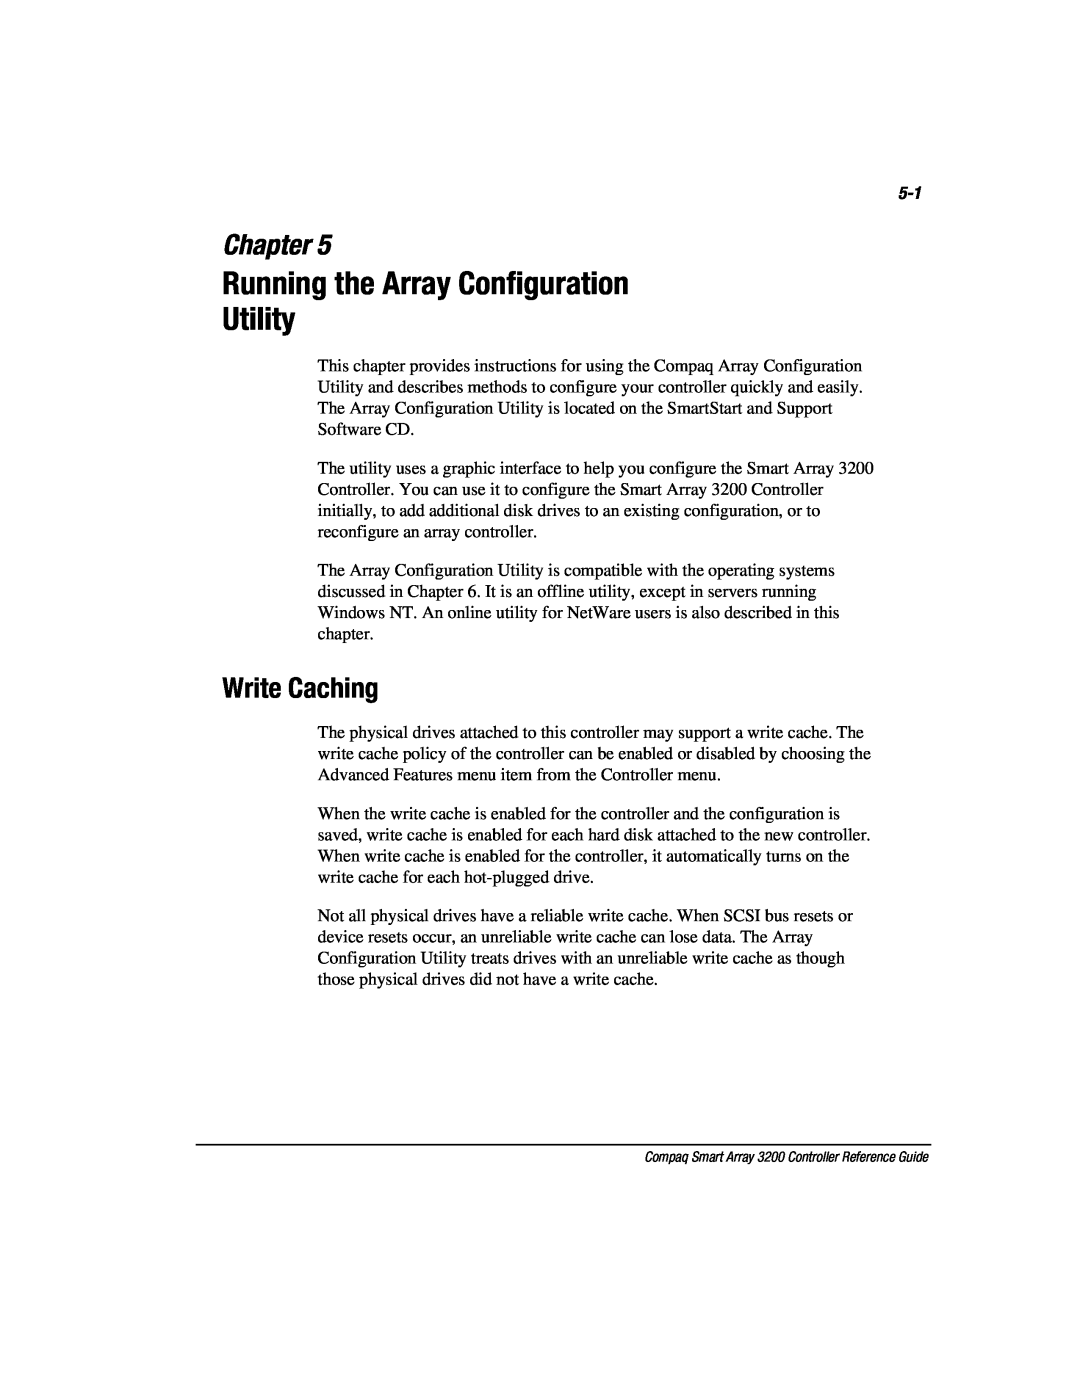 Compaq 3200 manual Running the Array Configuration Utility, Write Caching, Chapter 